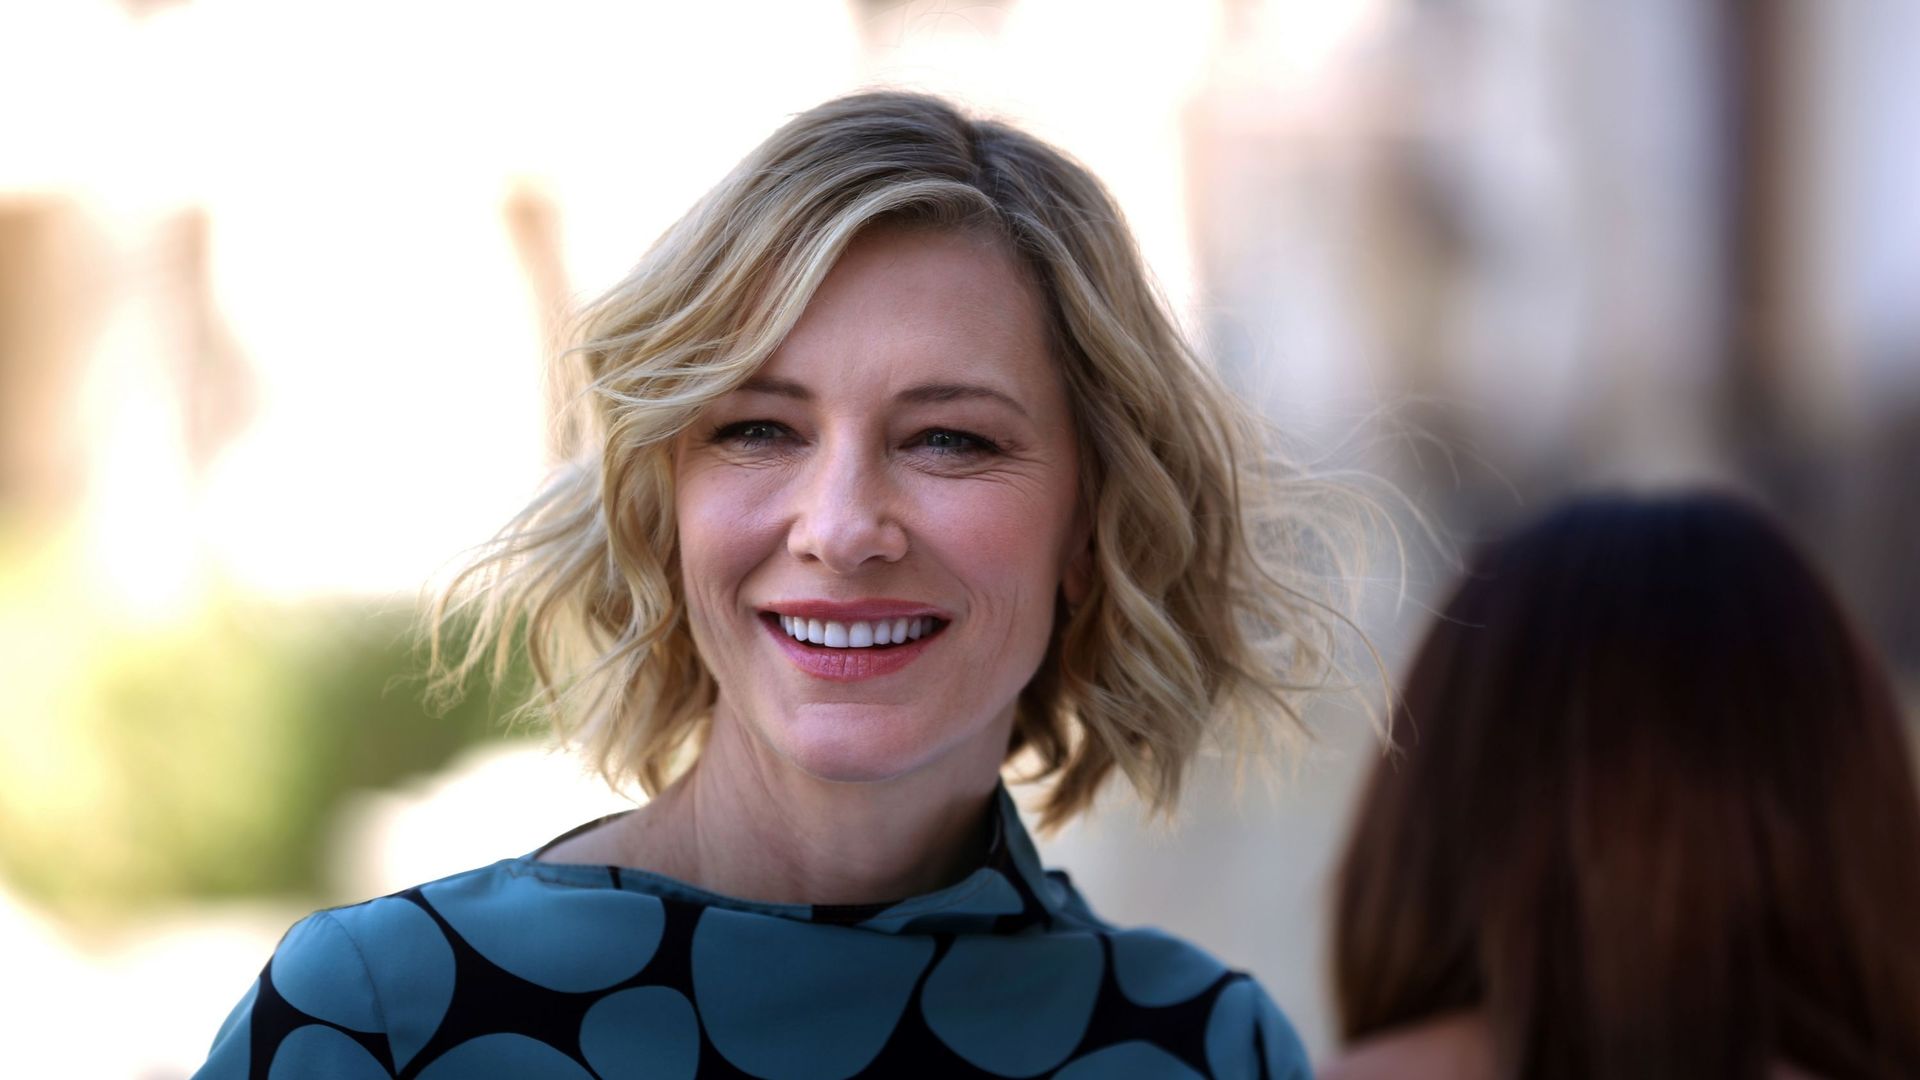 cate-blanchett-actrice-engagee-contre-le-harcelement-presidente-du-jury-a-cannes